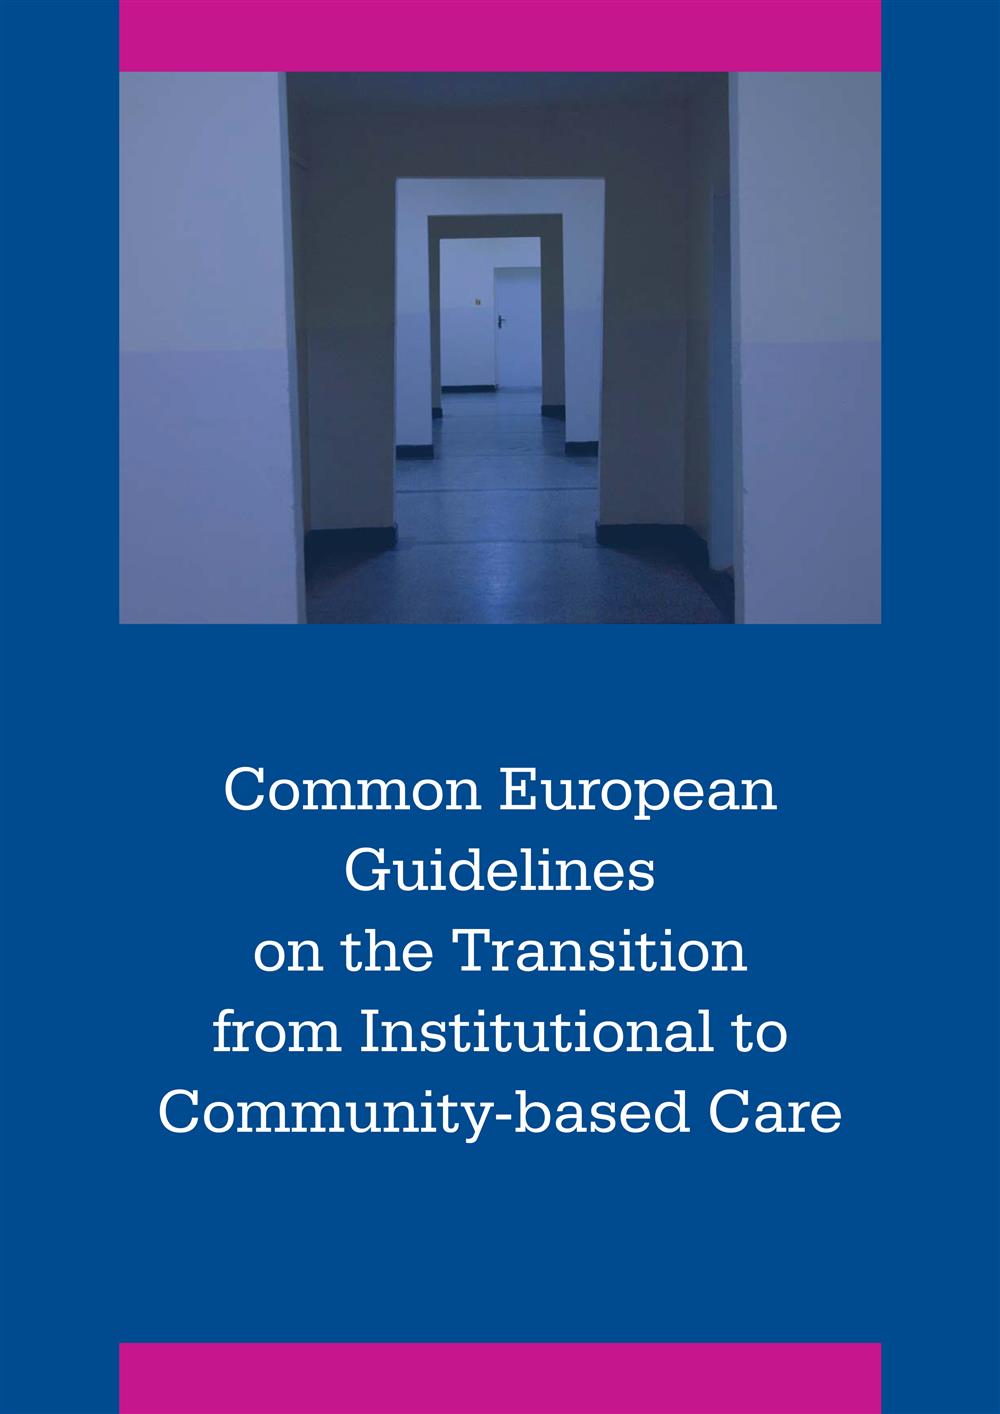 Common European Guidelines on the Transition from Institutional to Community-based Care copyright: European Expert Group on the Transition from Institutional to Community-based Care 